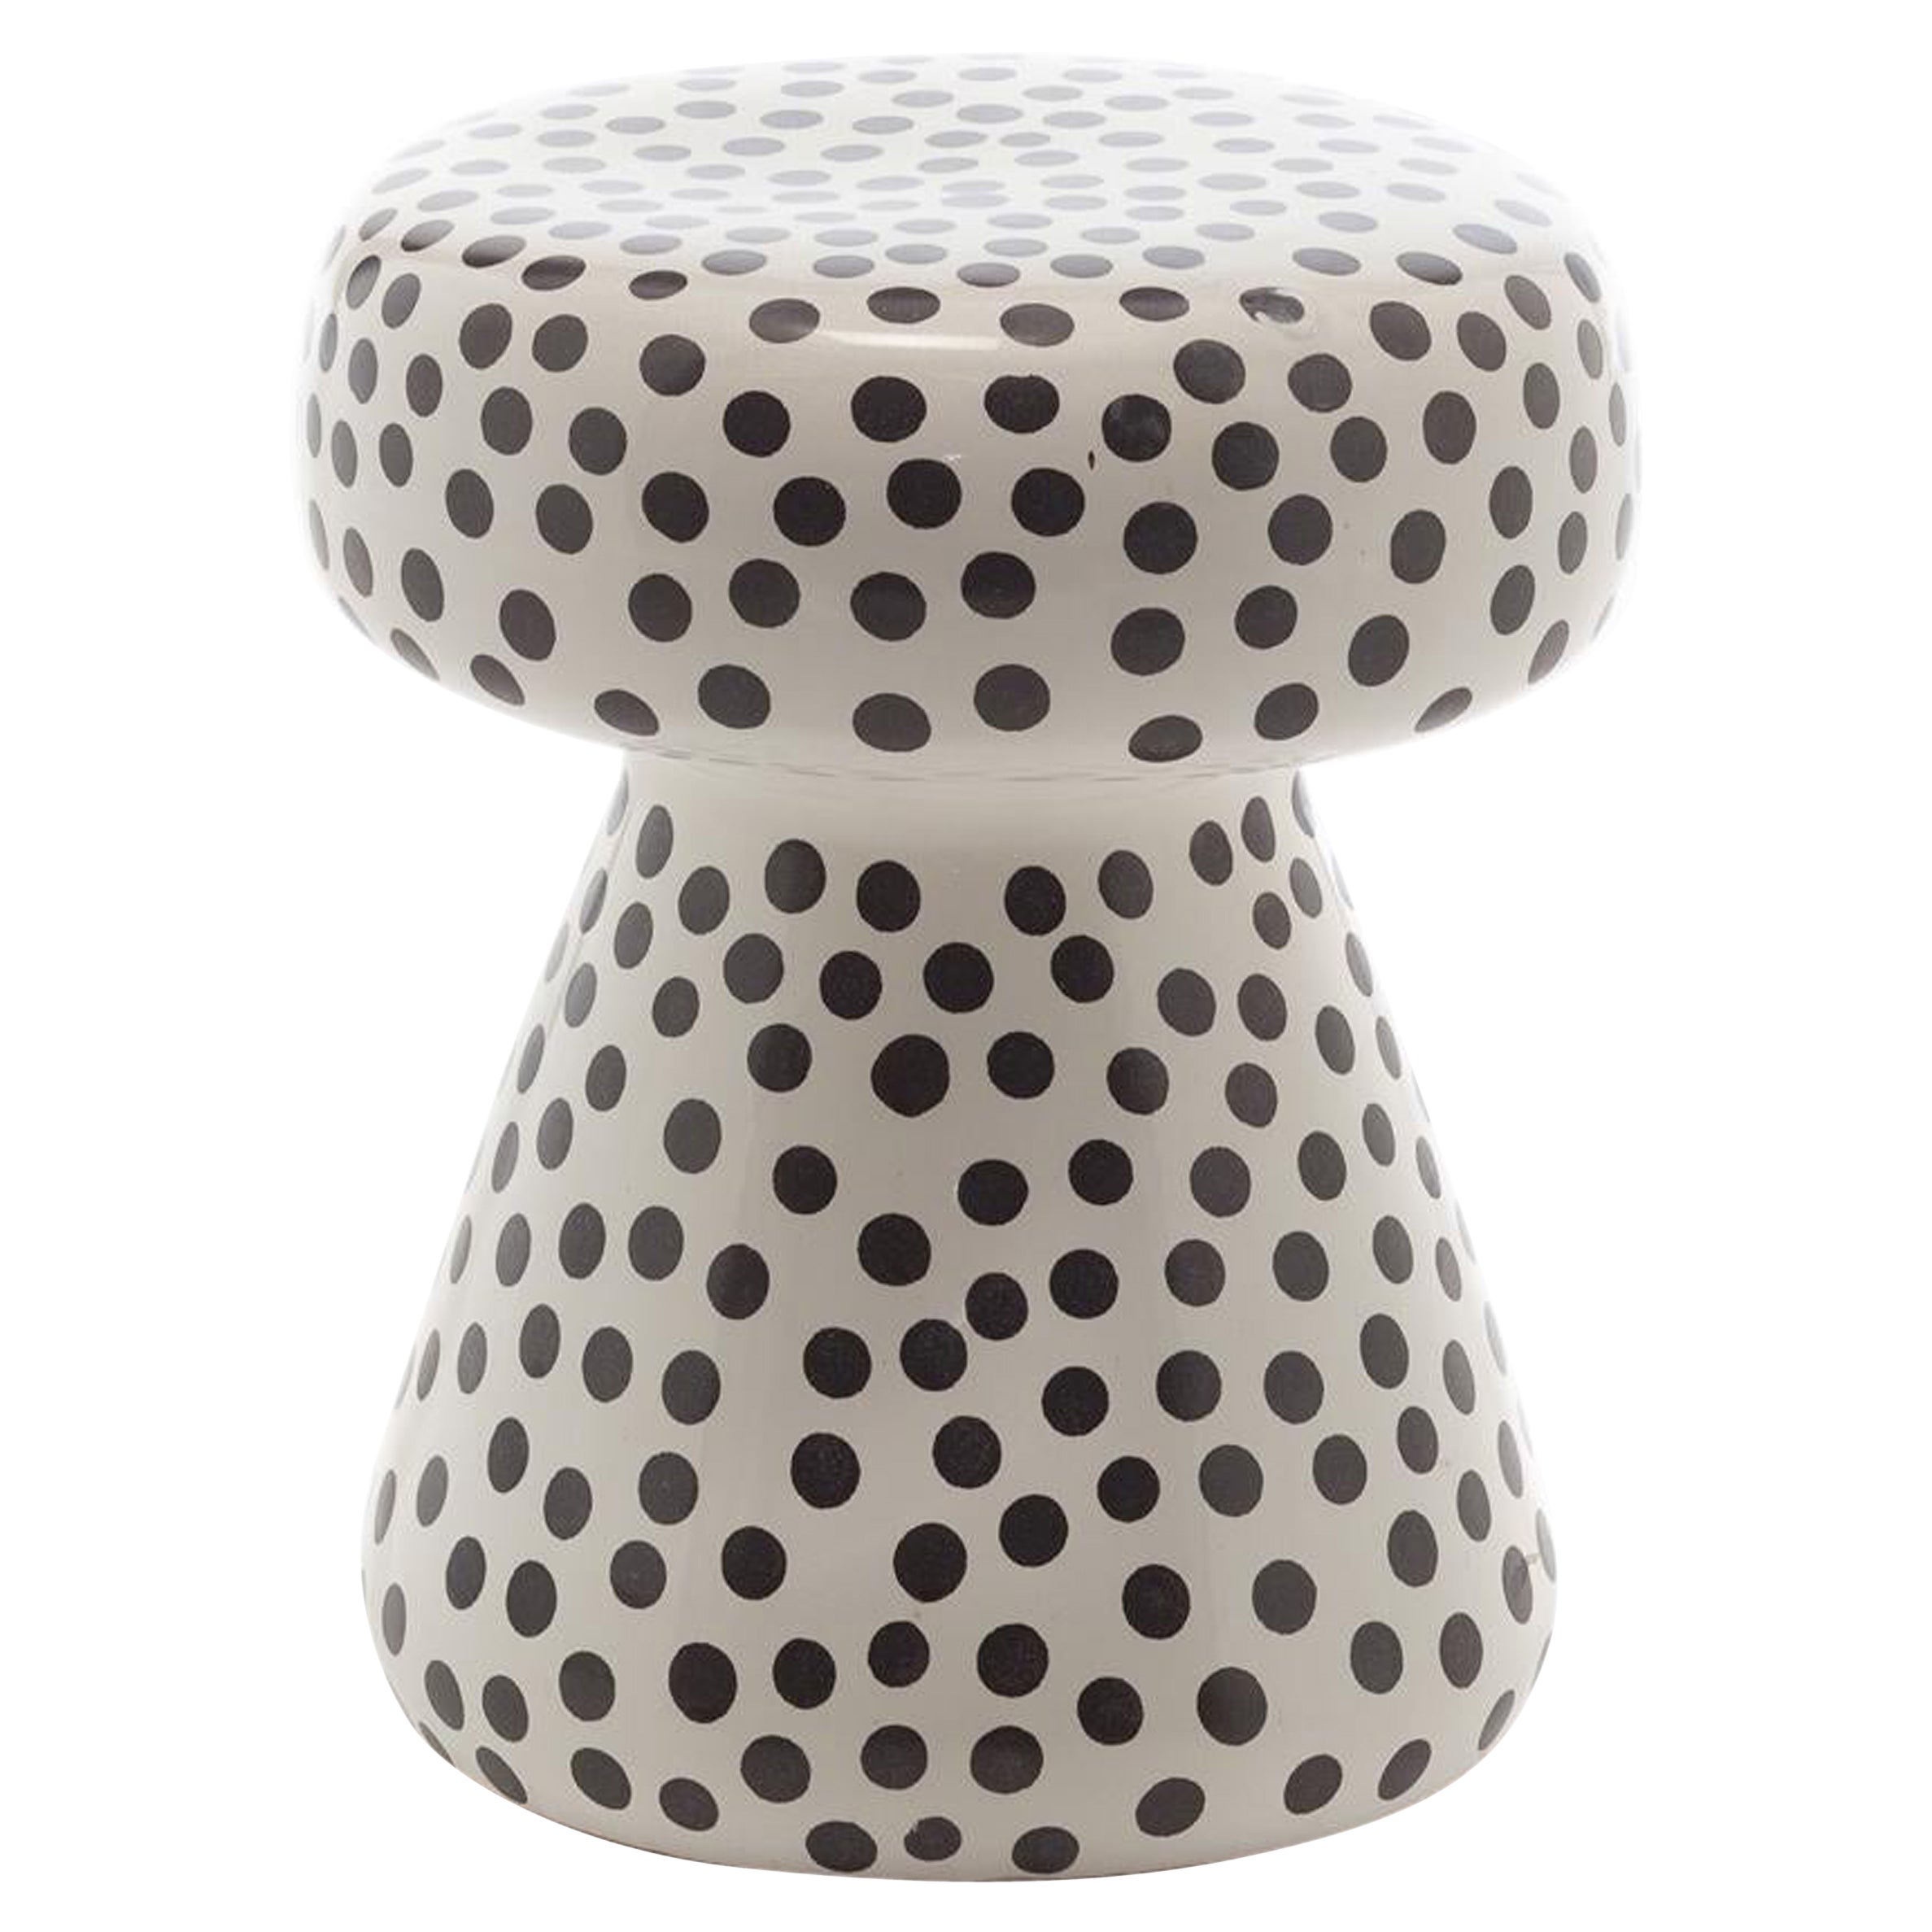 Gervasoni Inout Side Table in White Ceramic with Black Dots by Paola Navone